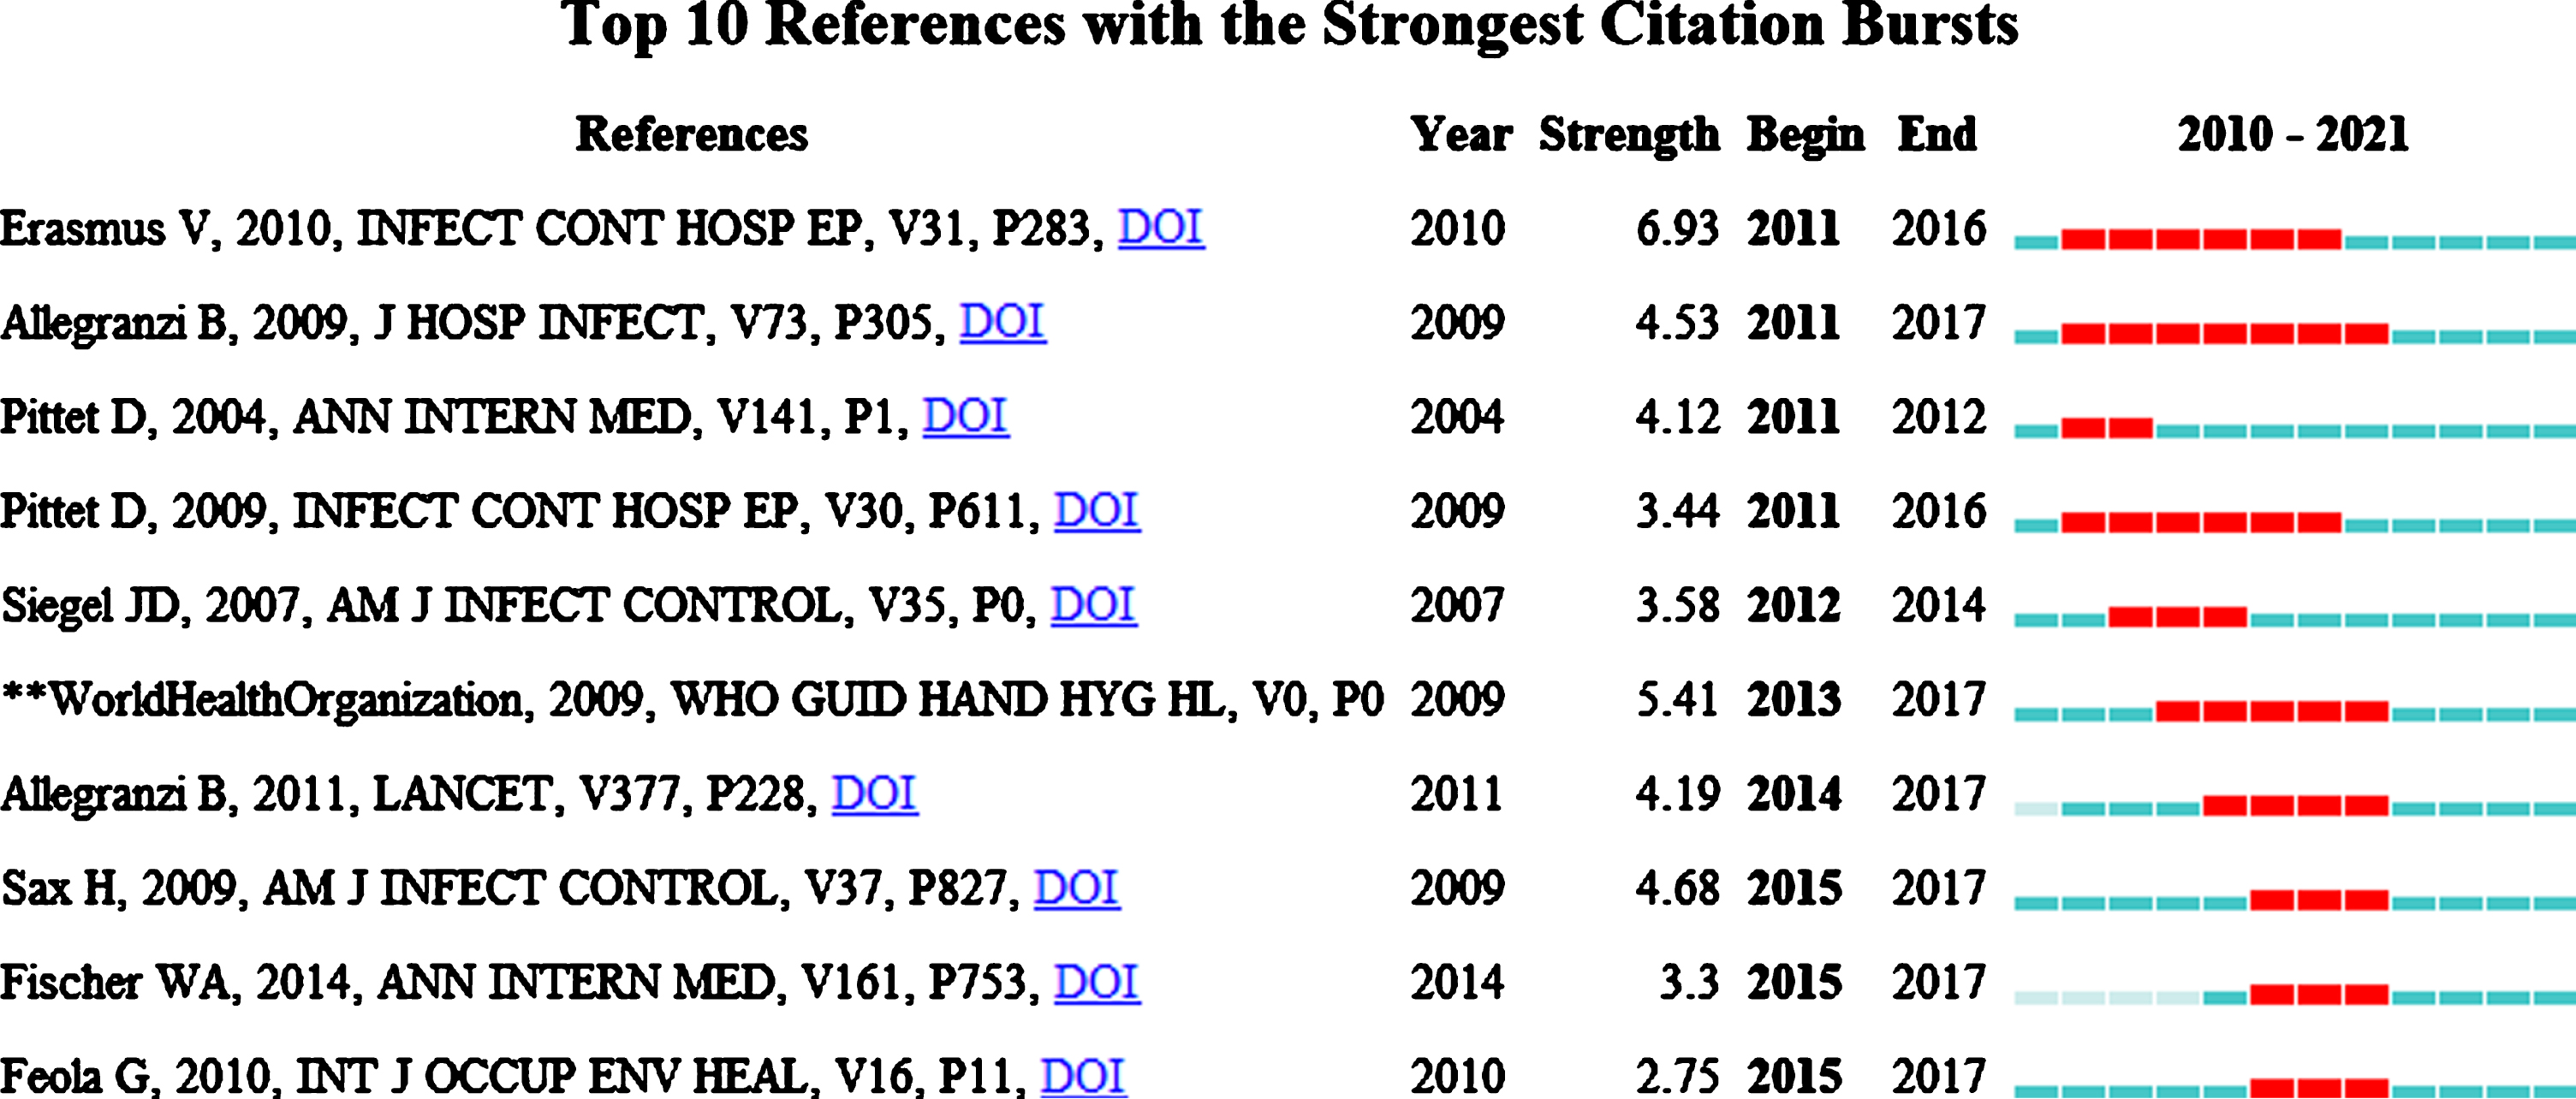 Top 10 references with the strongest citation bursts.